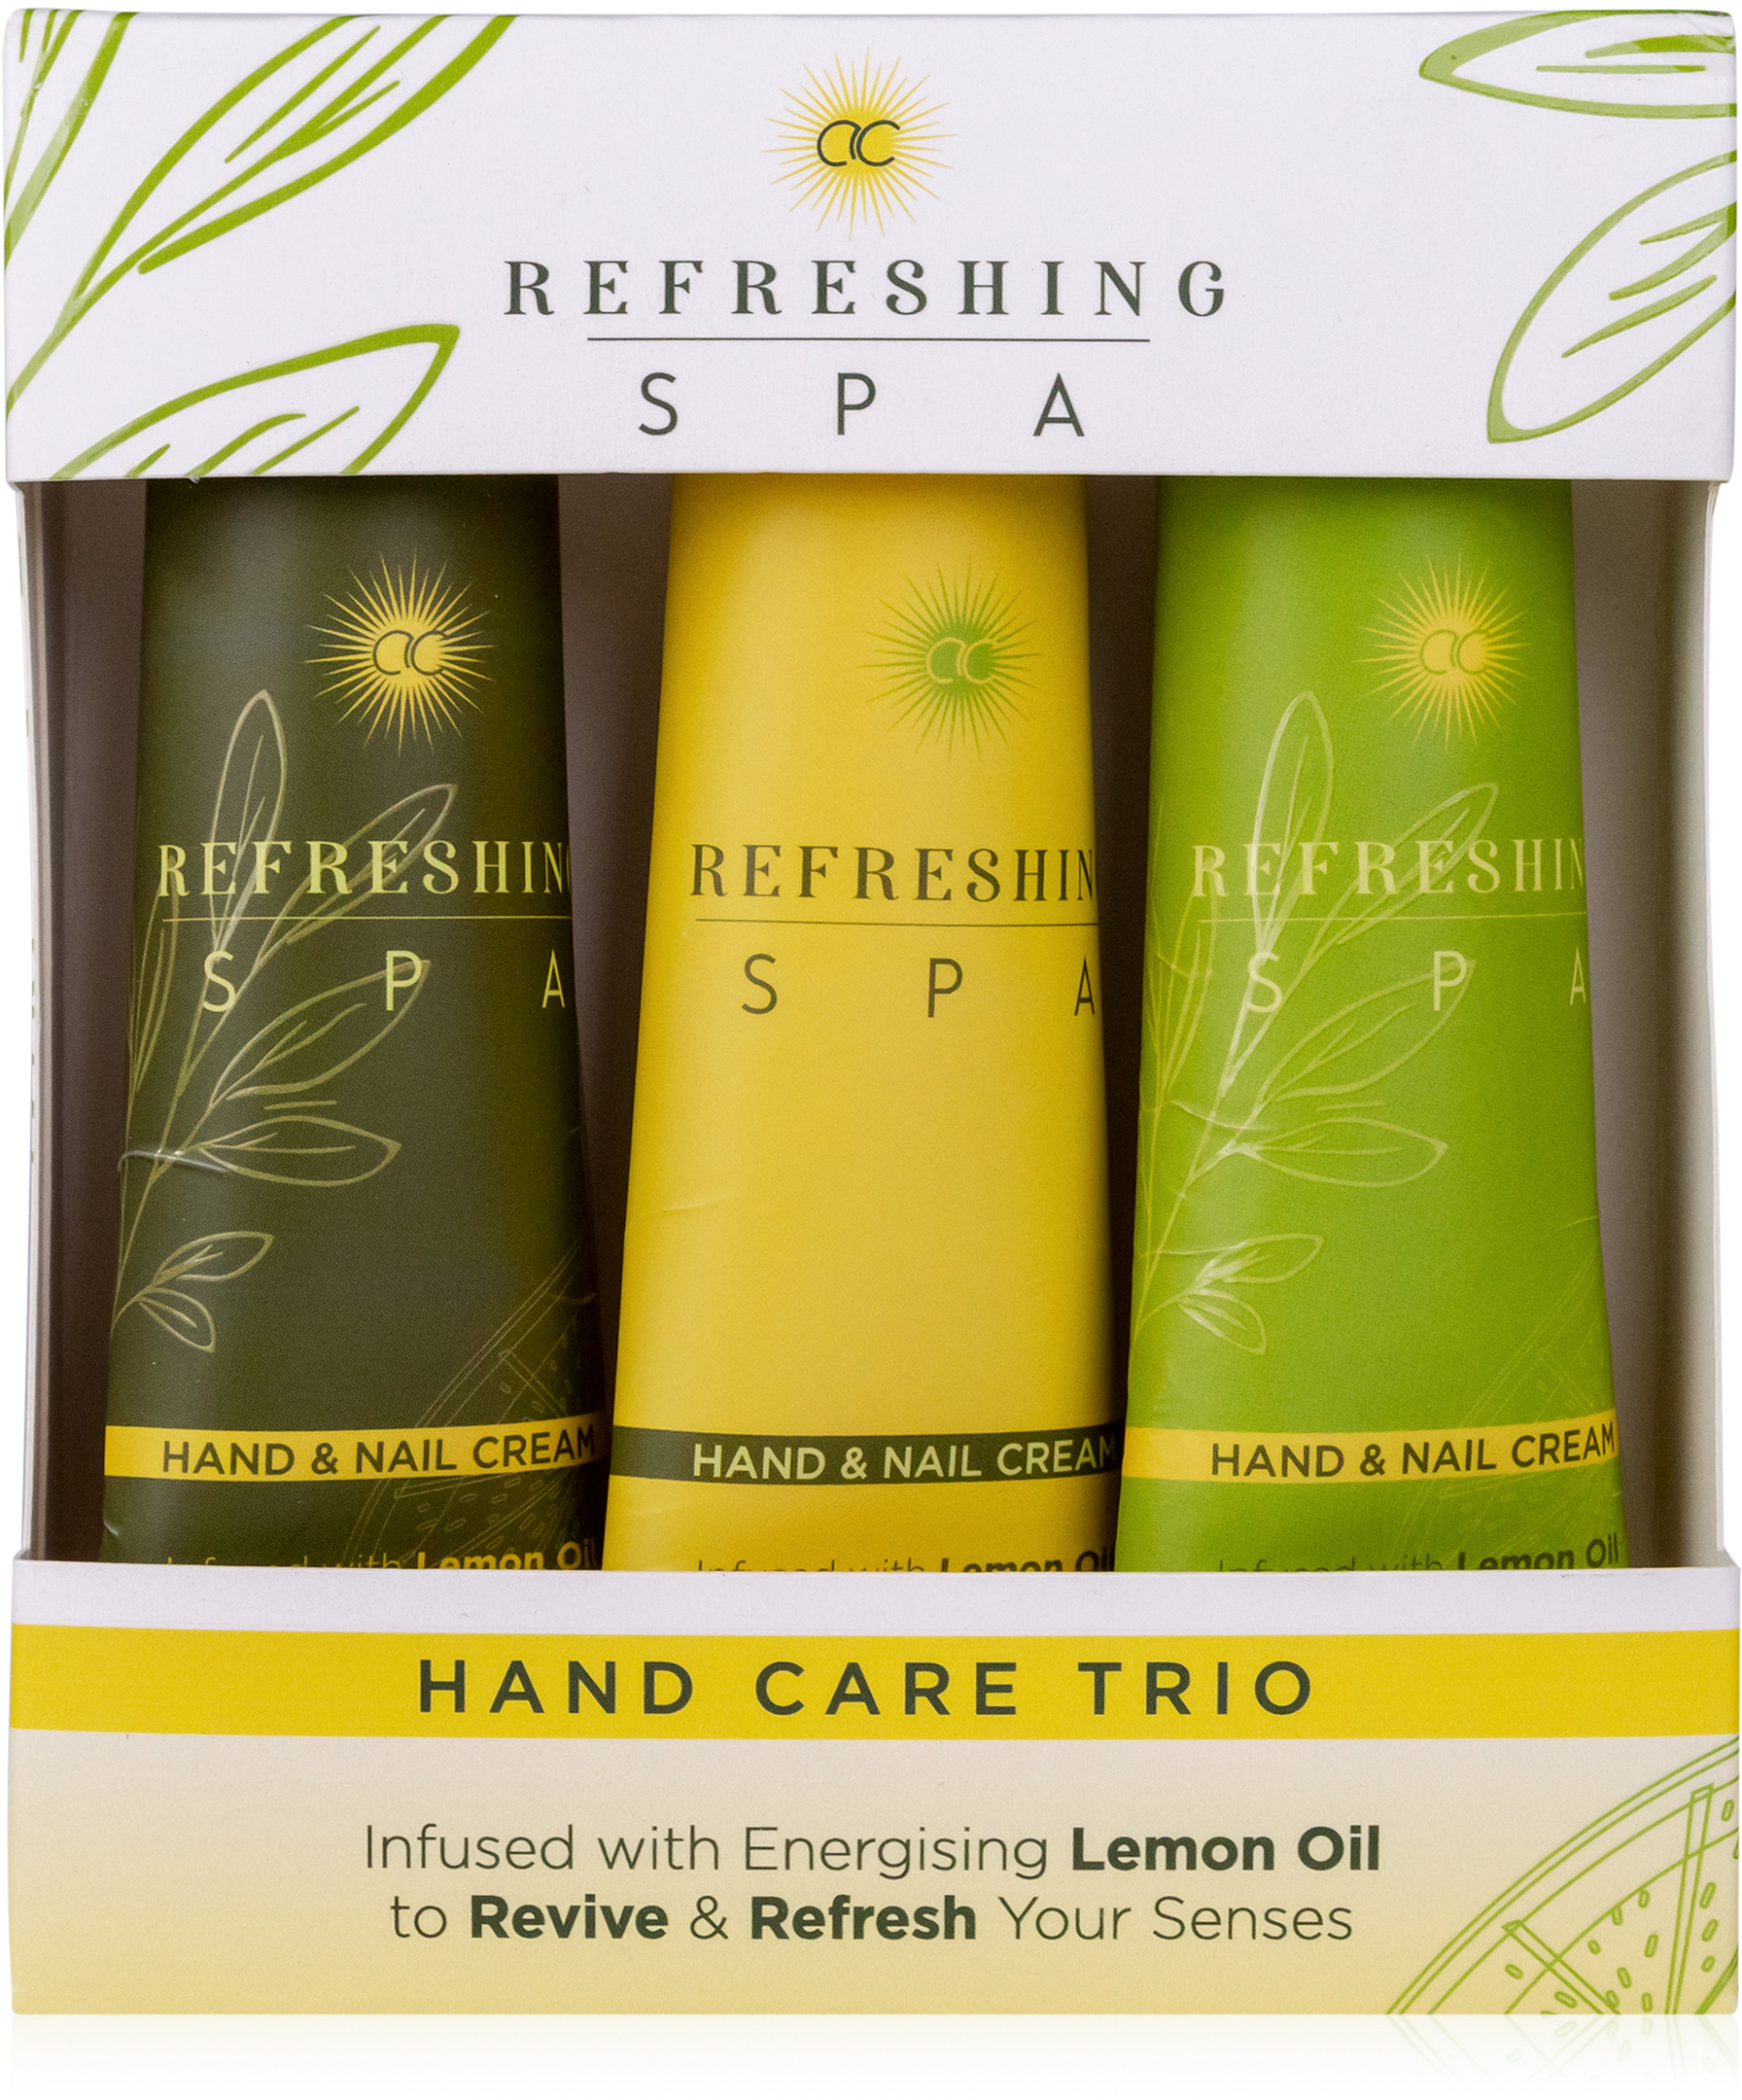 ACCENTRA Hand care set 6055576 Refreshing Spa Refreshing Spa